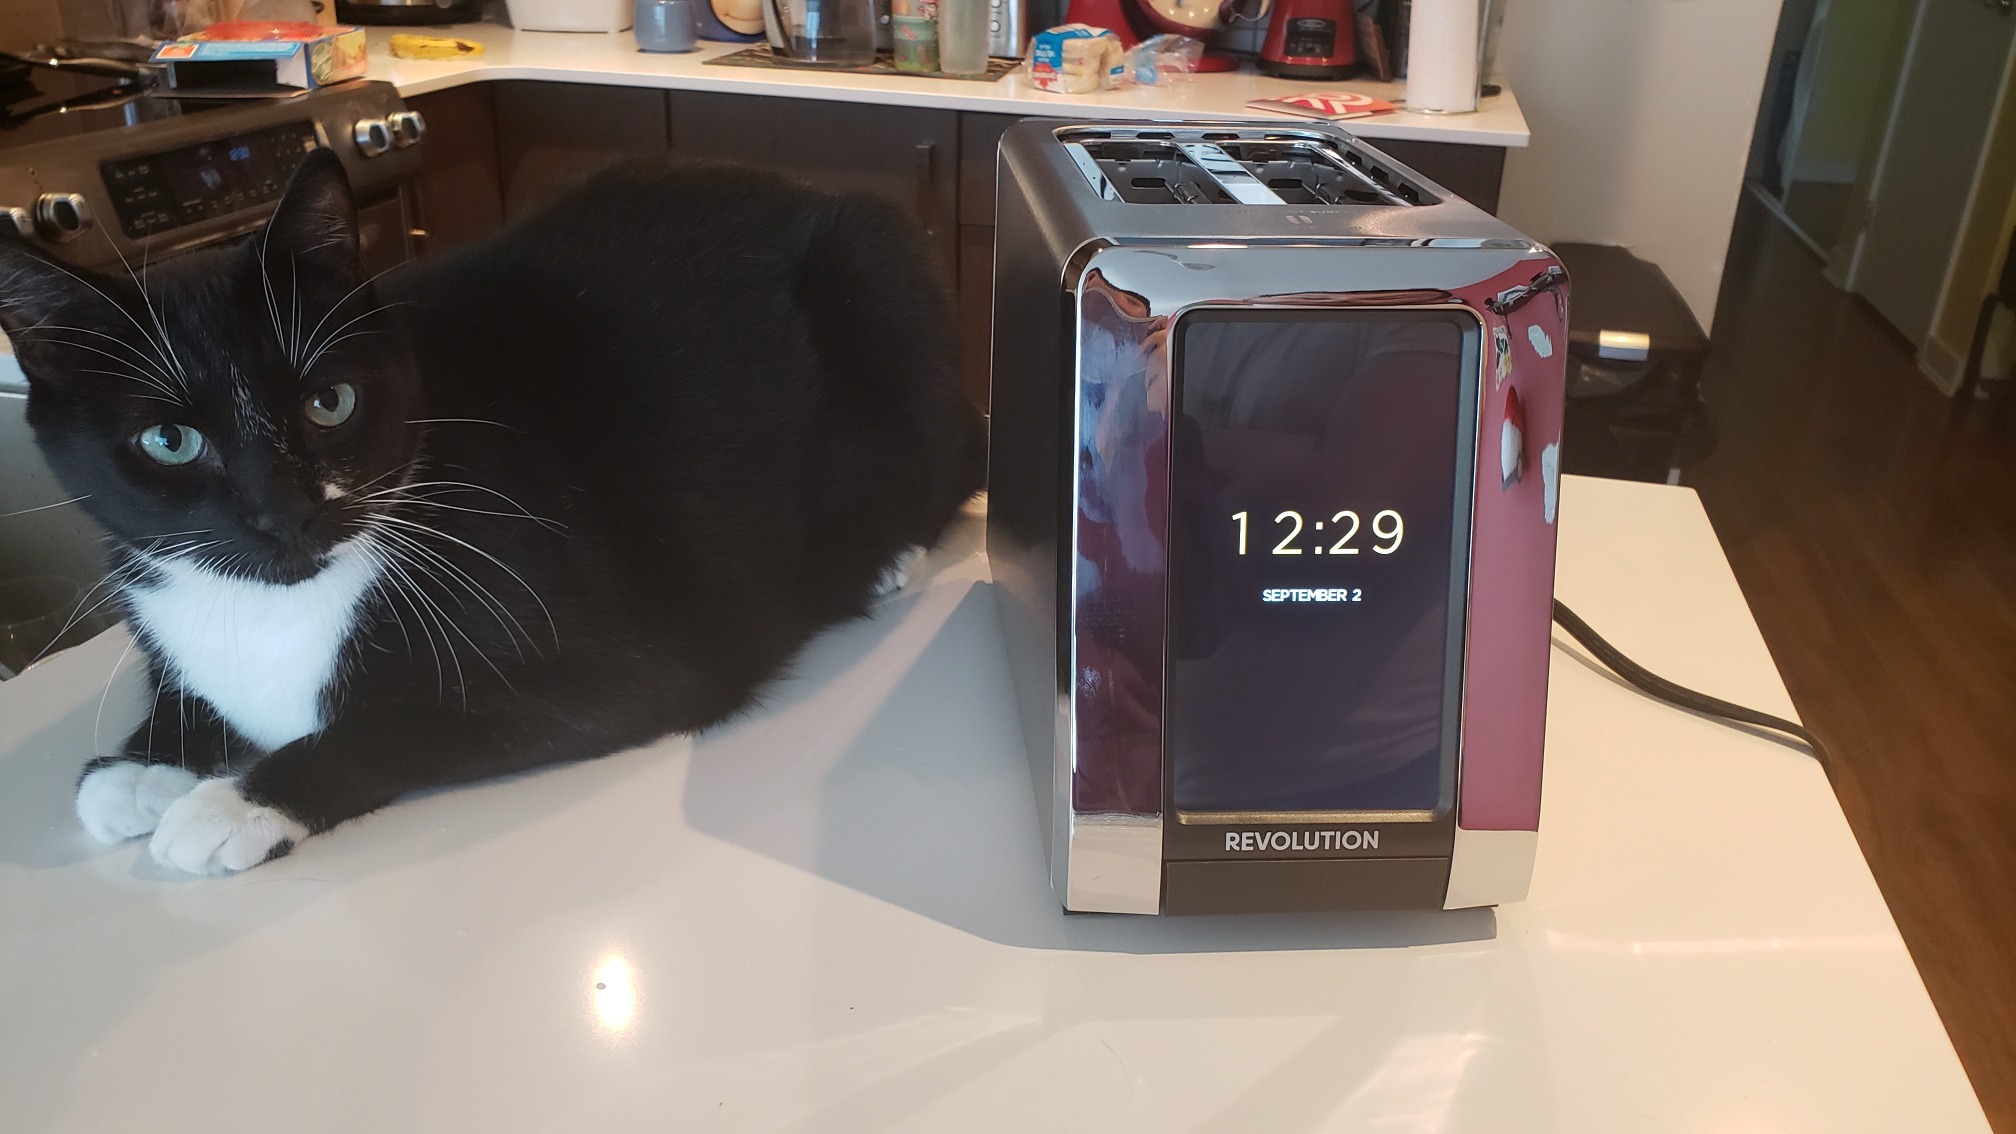 a cat next to the Revolution Toaster - he didn't get startled once